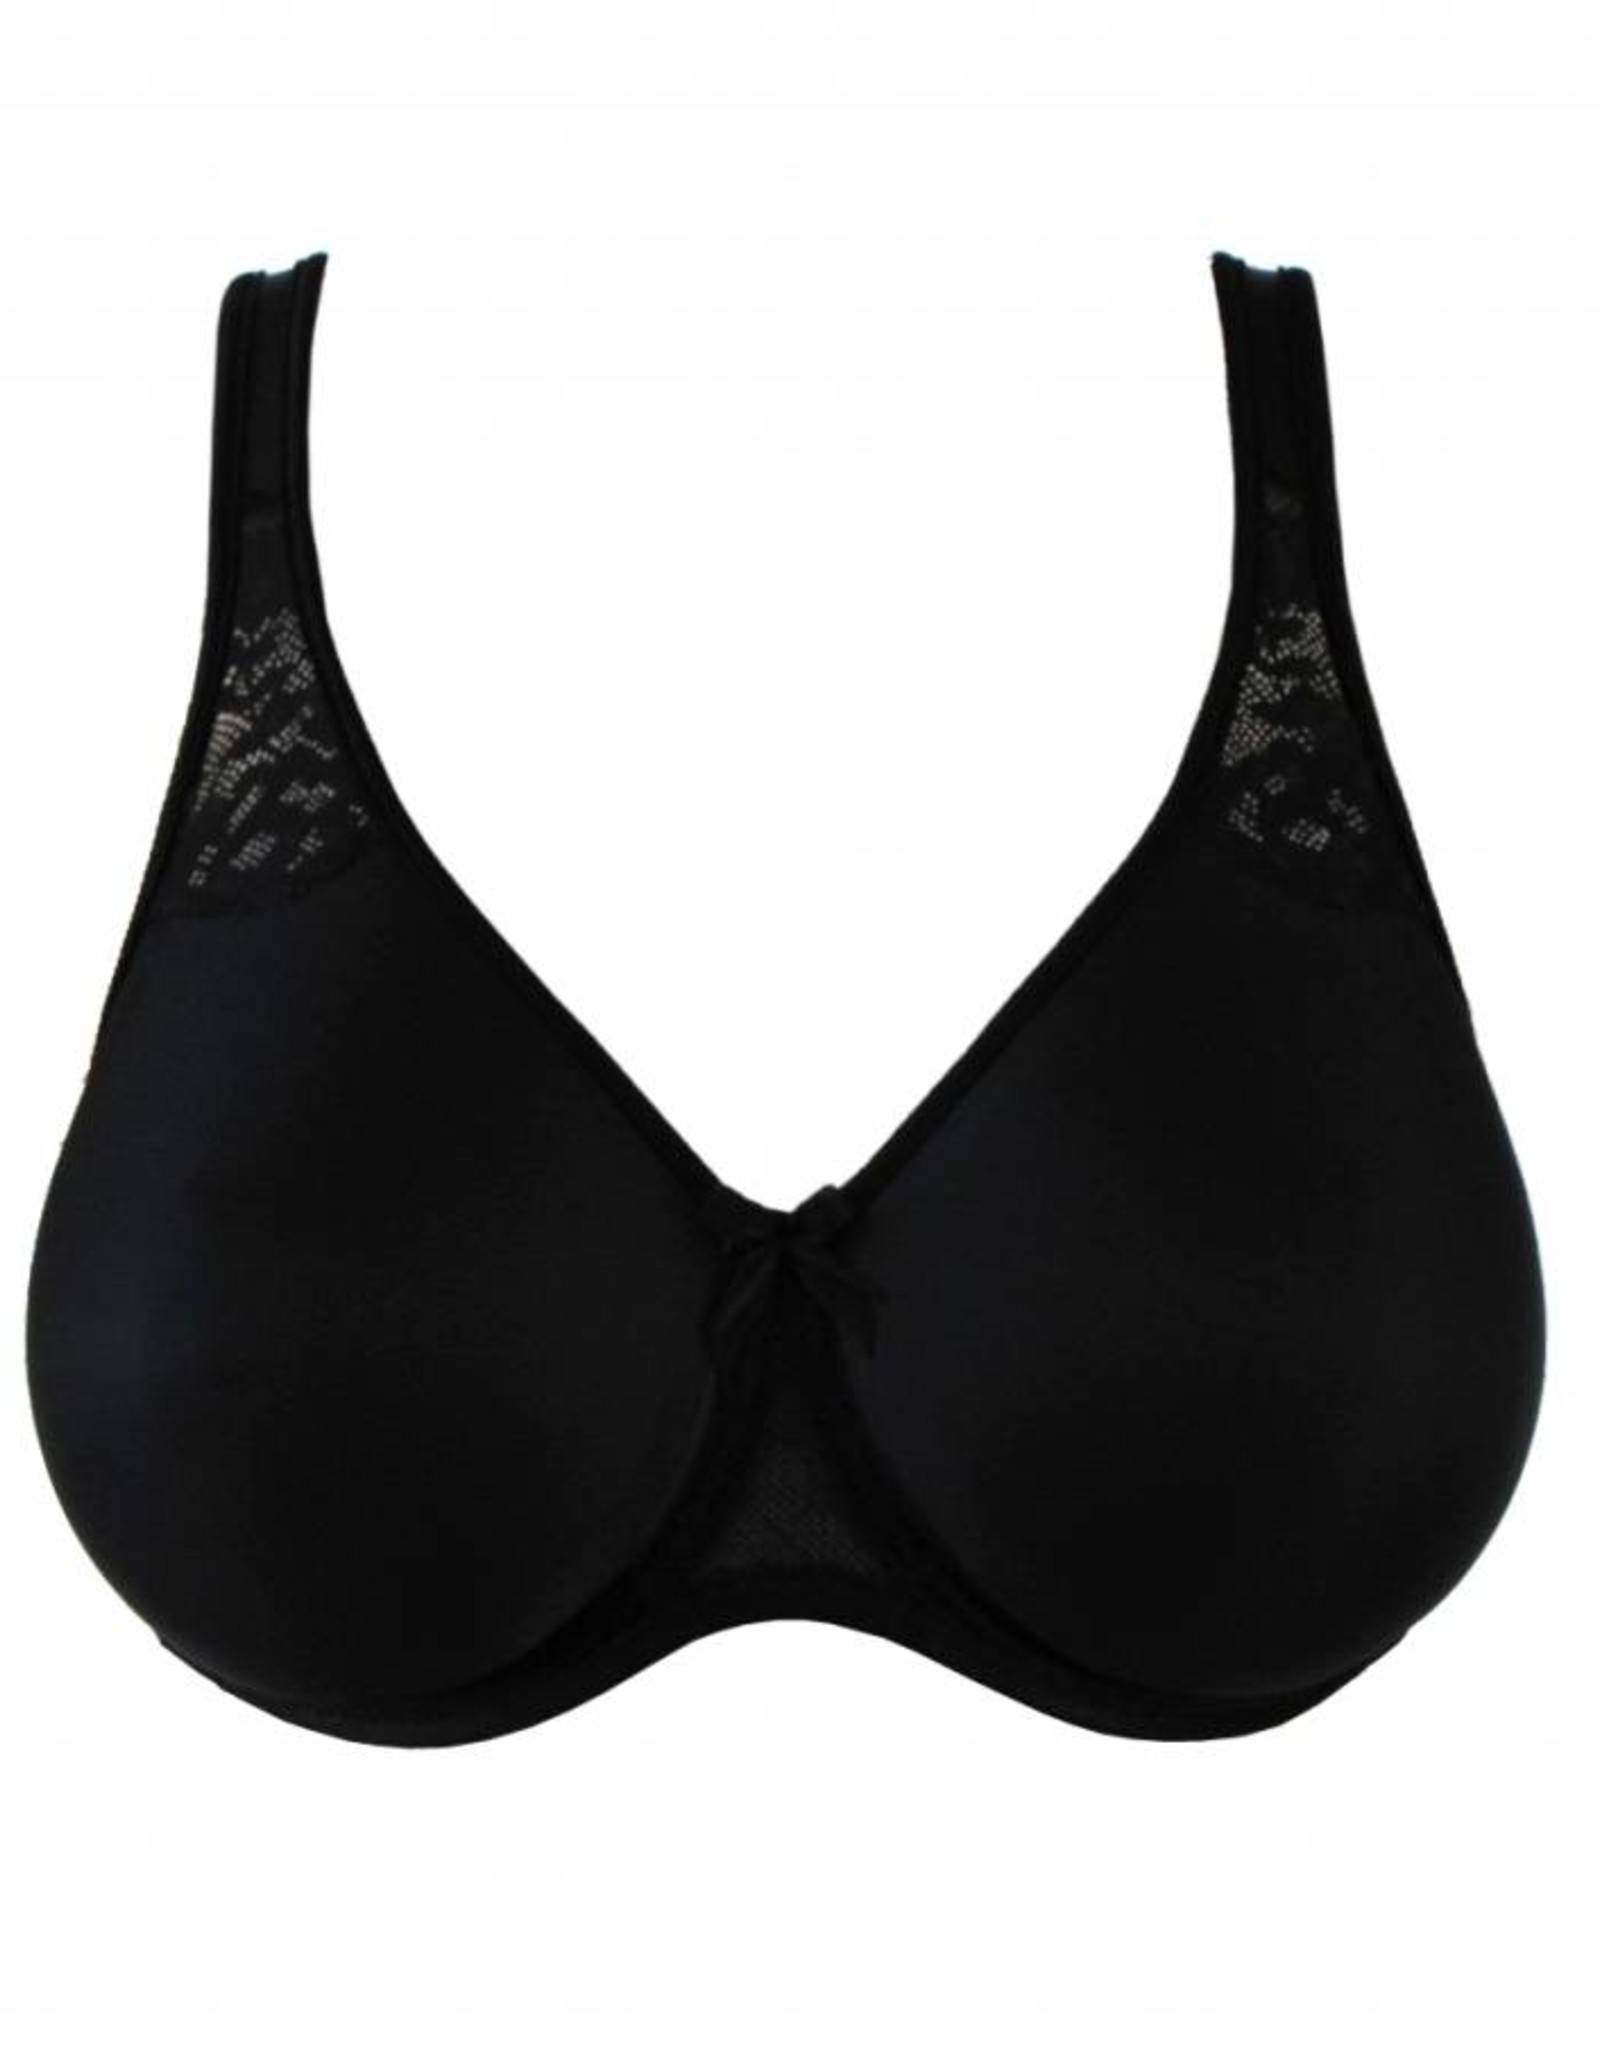 Black extra support underwire opaque bra, MELODY